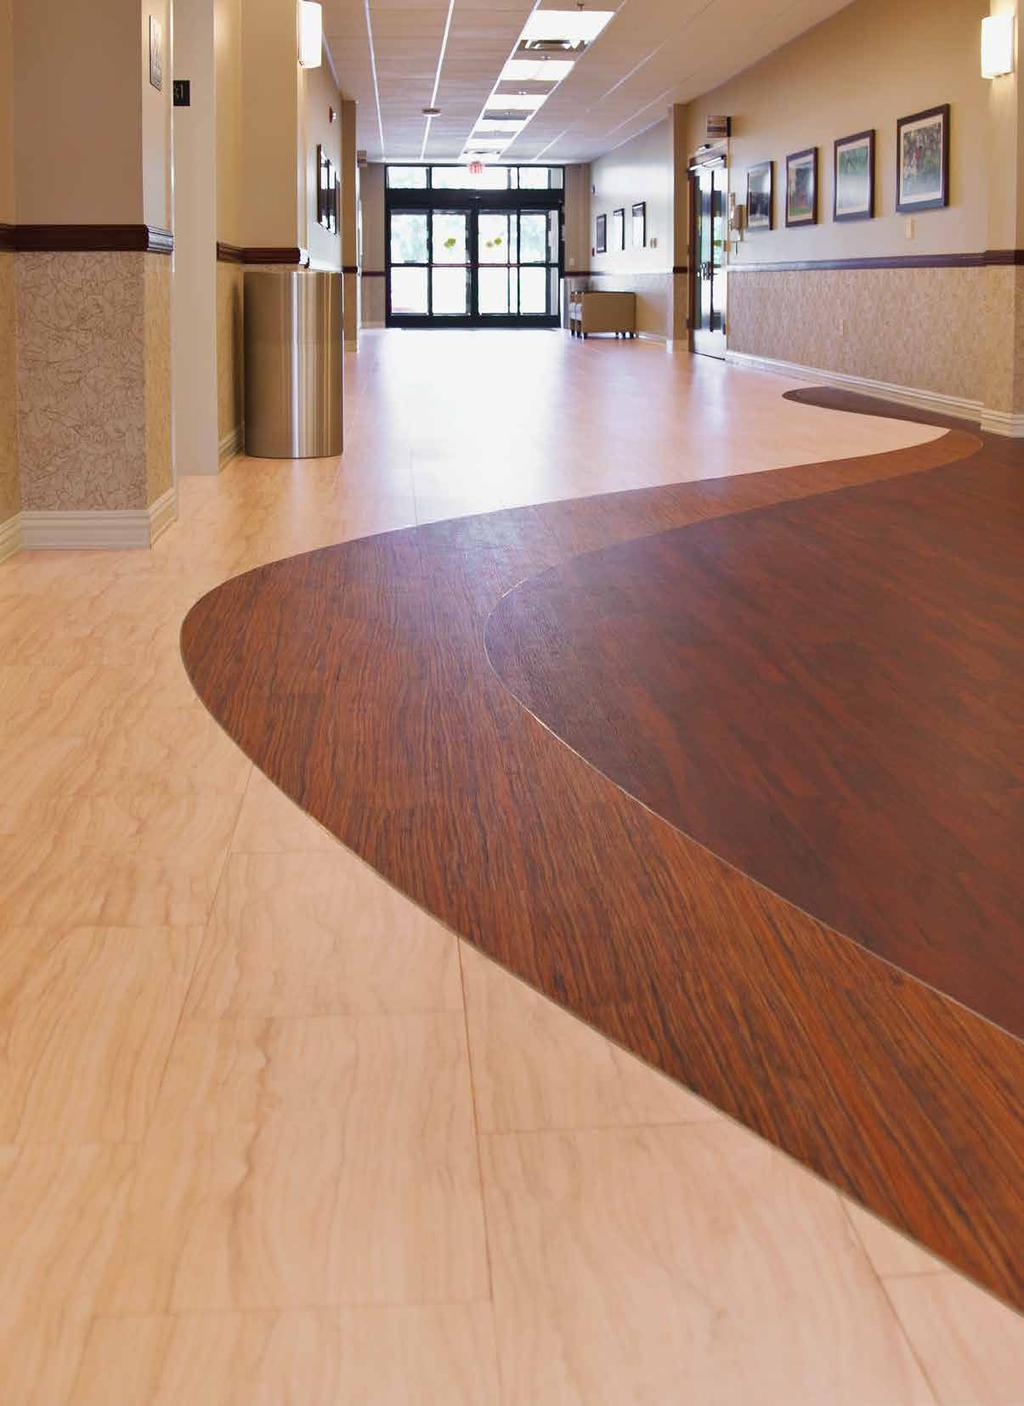 Tandus Centiva, a Tarkett company, provides fit-forpurpose solutions through a unique line of Powerbond, Freeform, Modular, Broadloom, Woven and LVT products that work in tandem to enhance spaces for